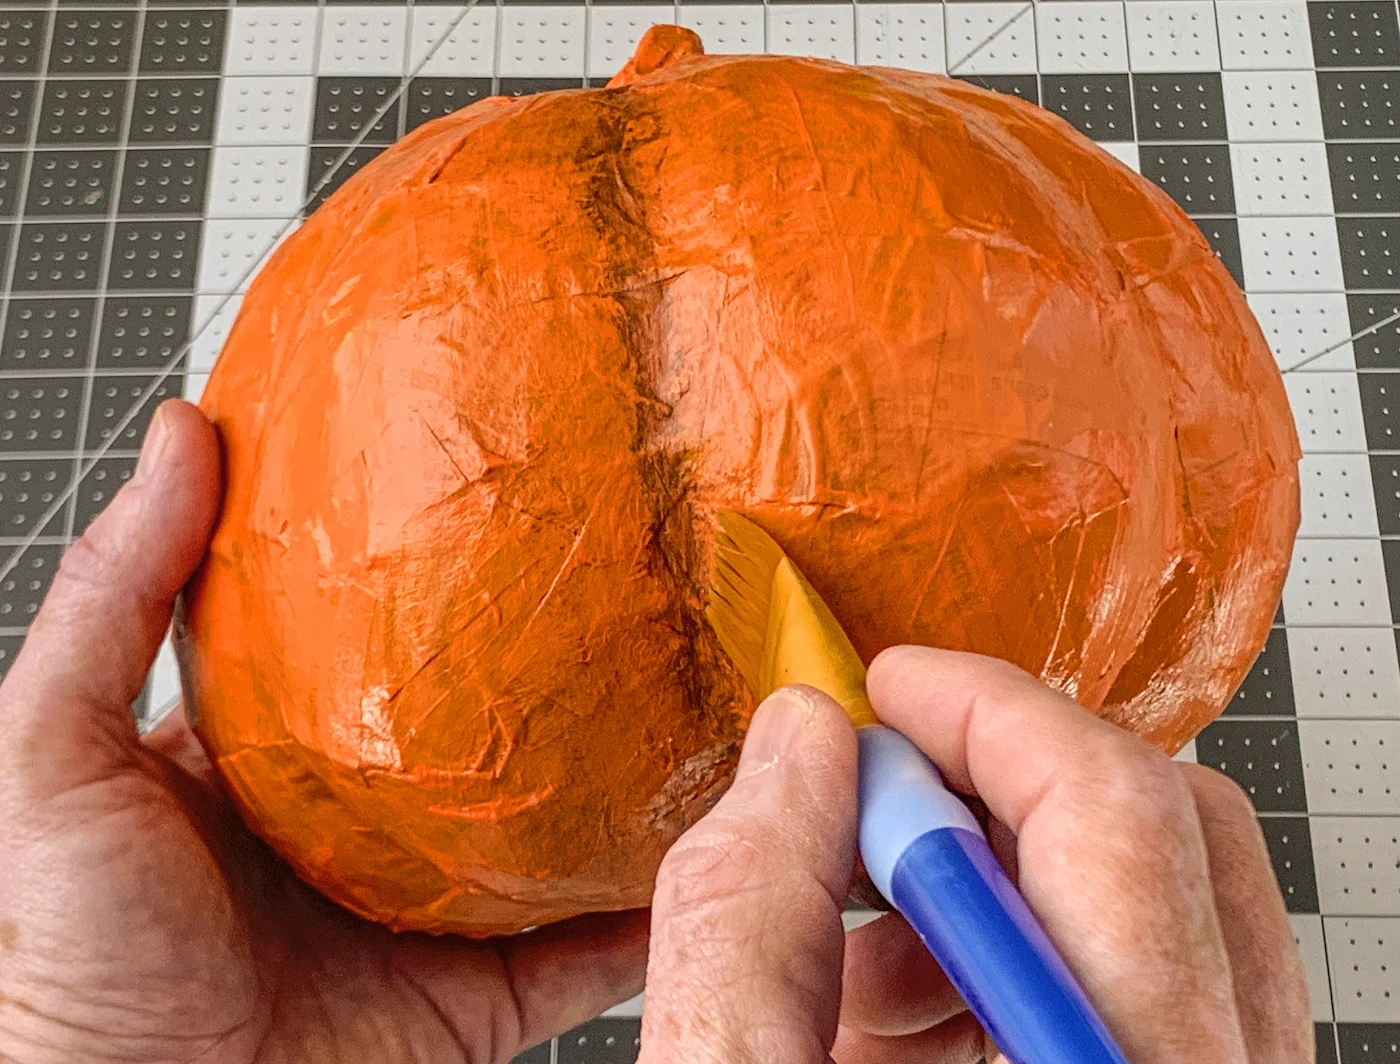 Adding brown paint between the pumpkin ribs with a paintbrush